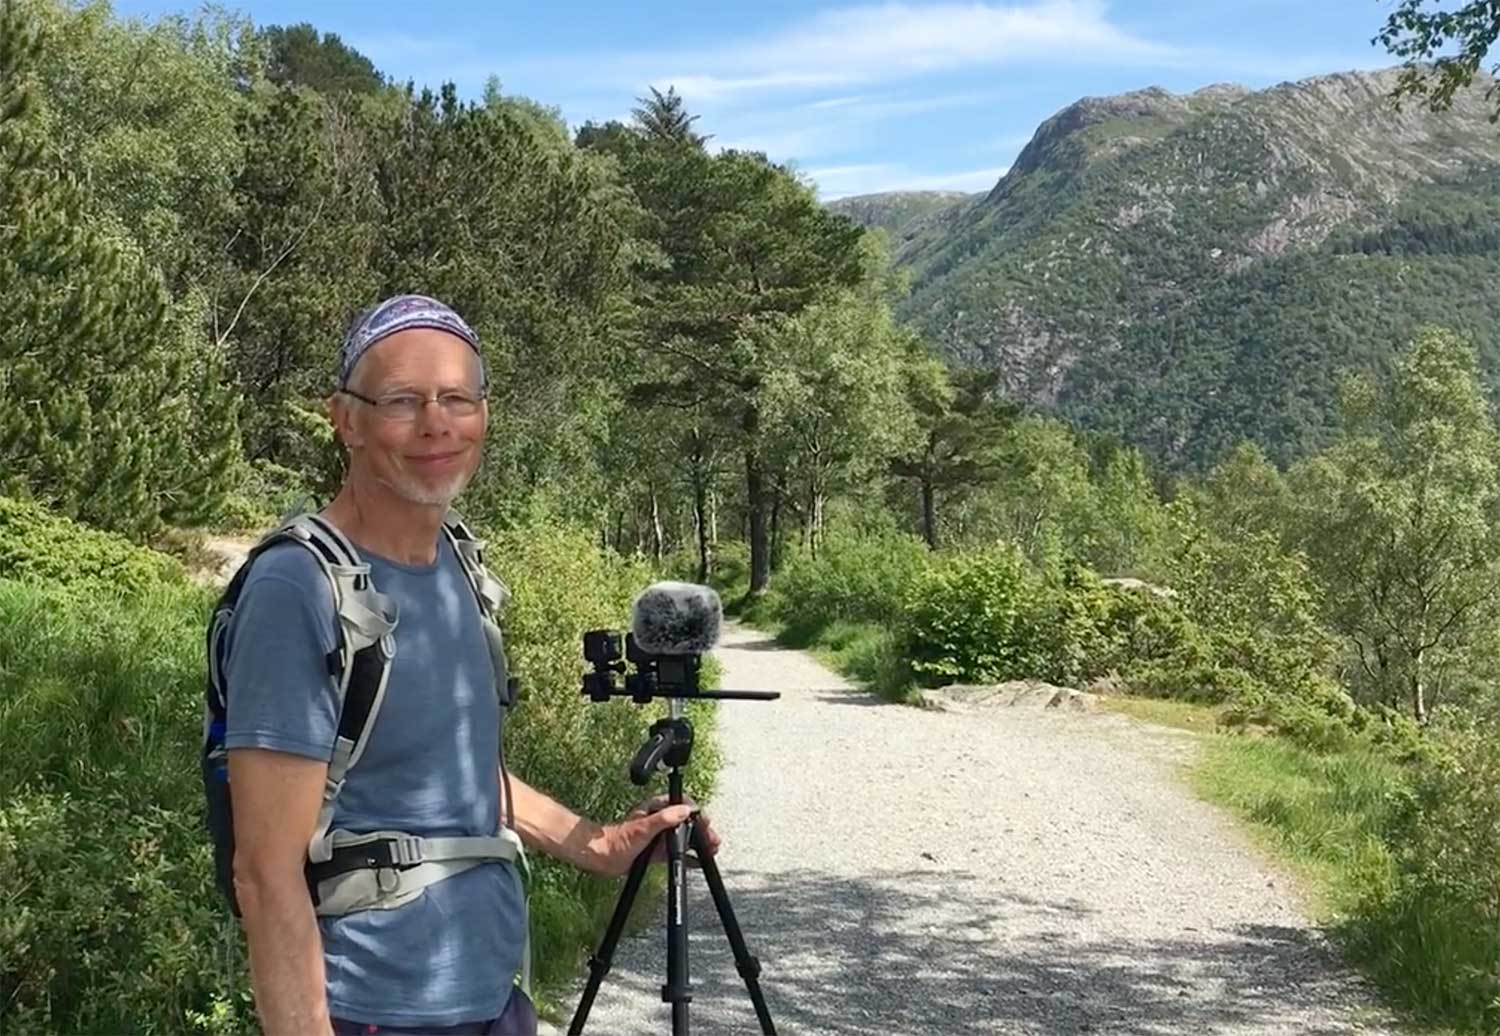 The author with the VR120 setup on location in beautiful Bergen. (Photo: Berit Hartveit)